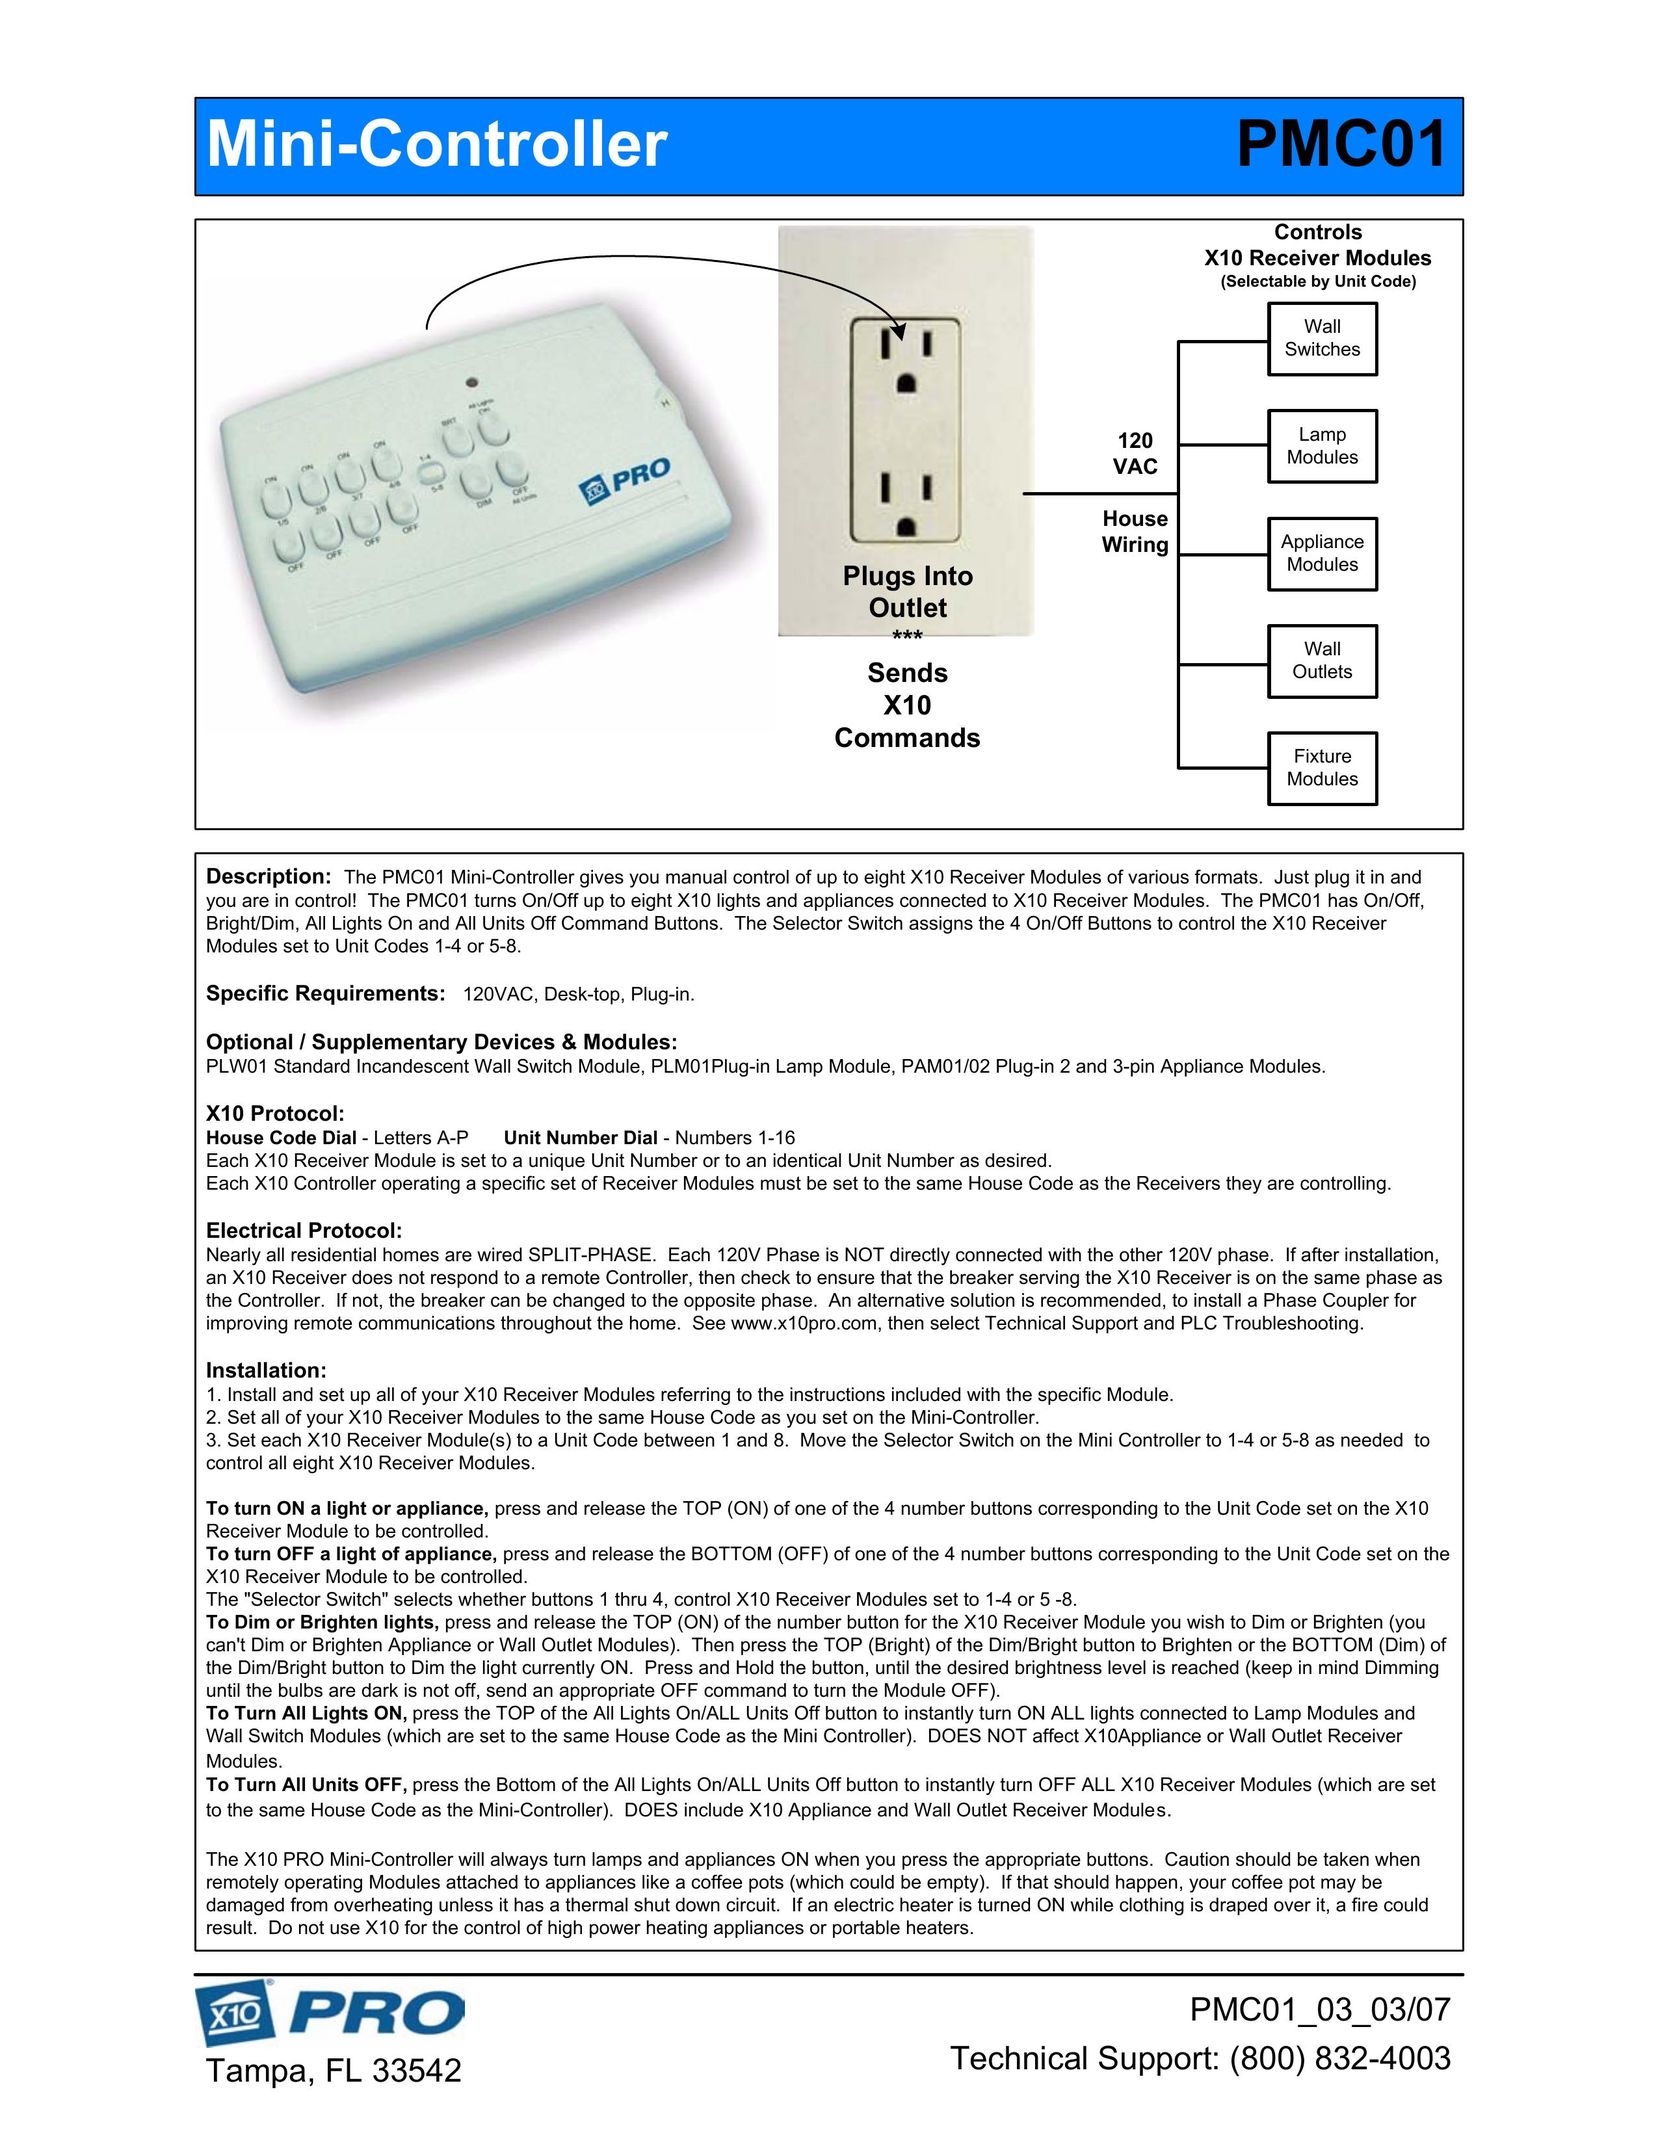 Pro-Tech PMC01 Network Card User Manual